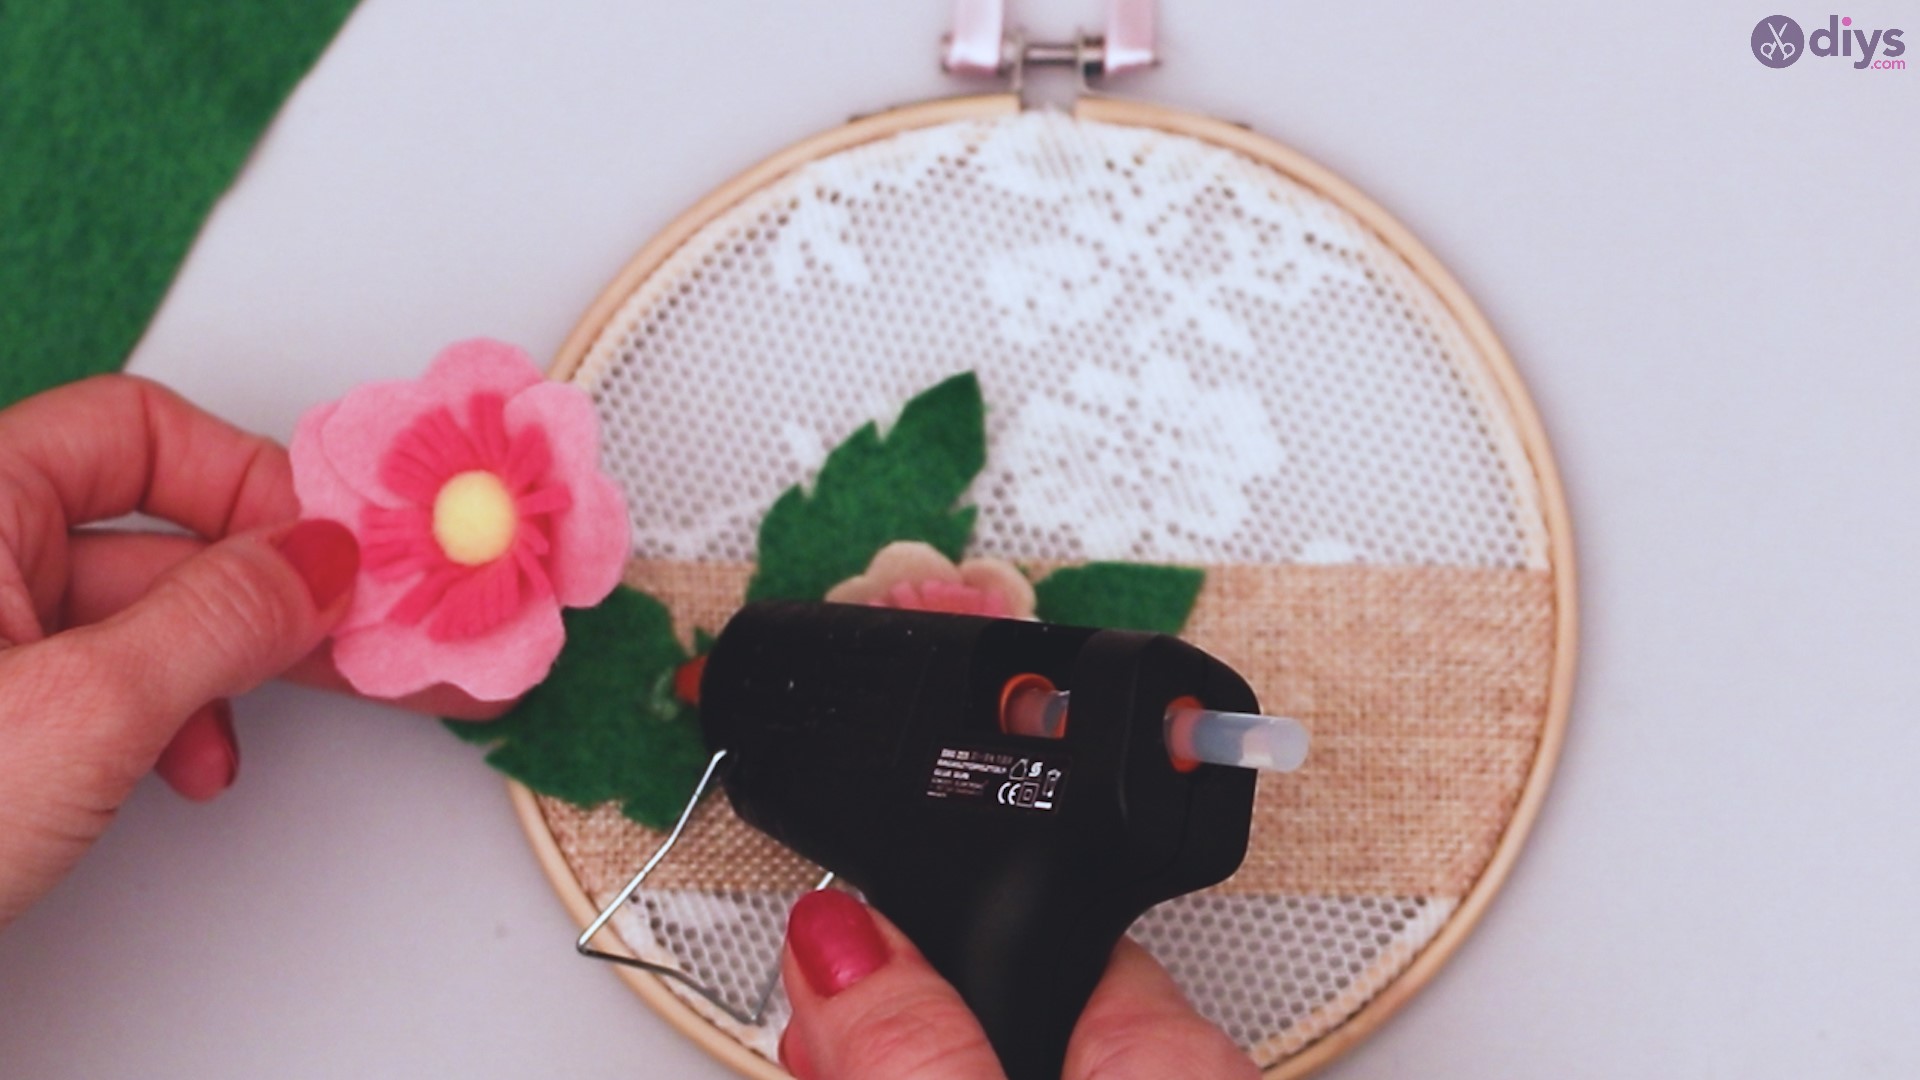 Diy embroidery hoop wall decor tutorial step by step (60)